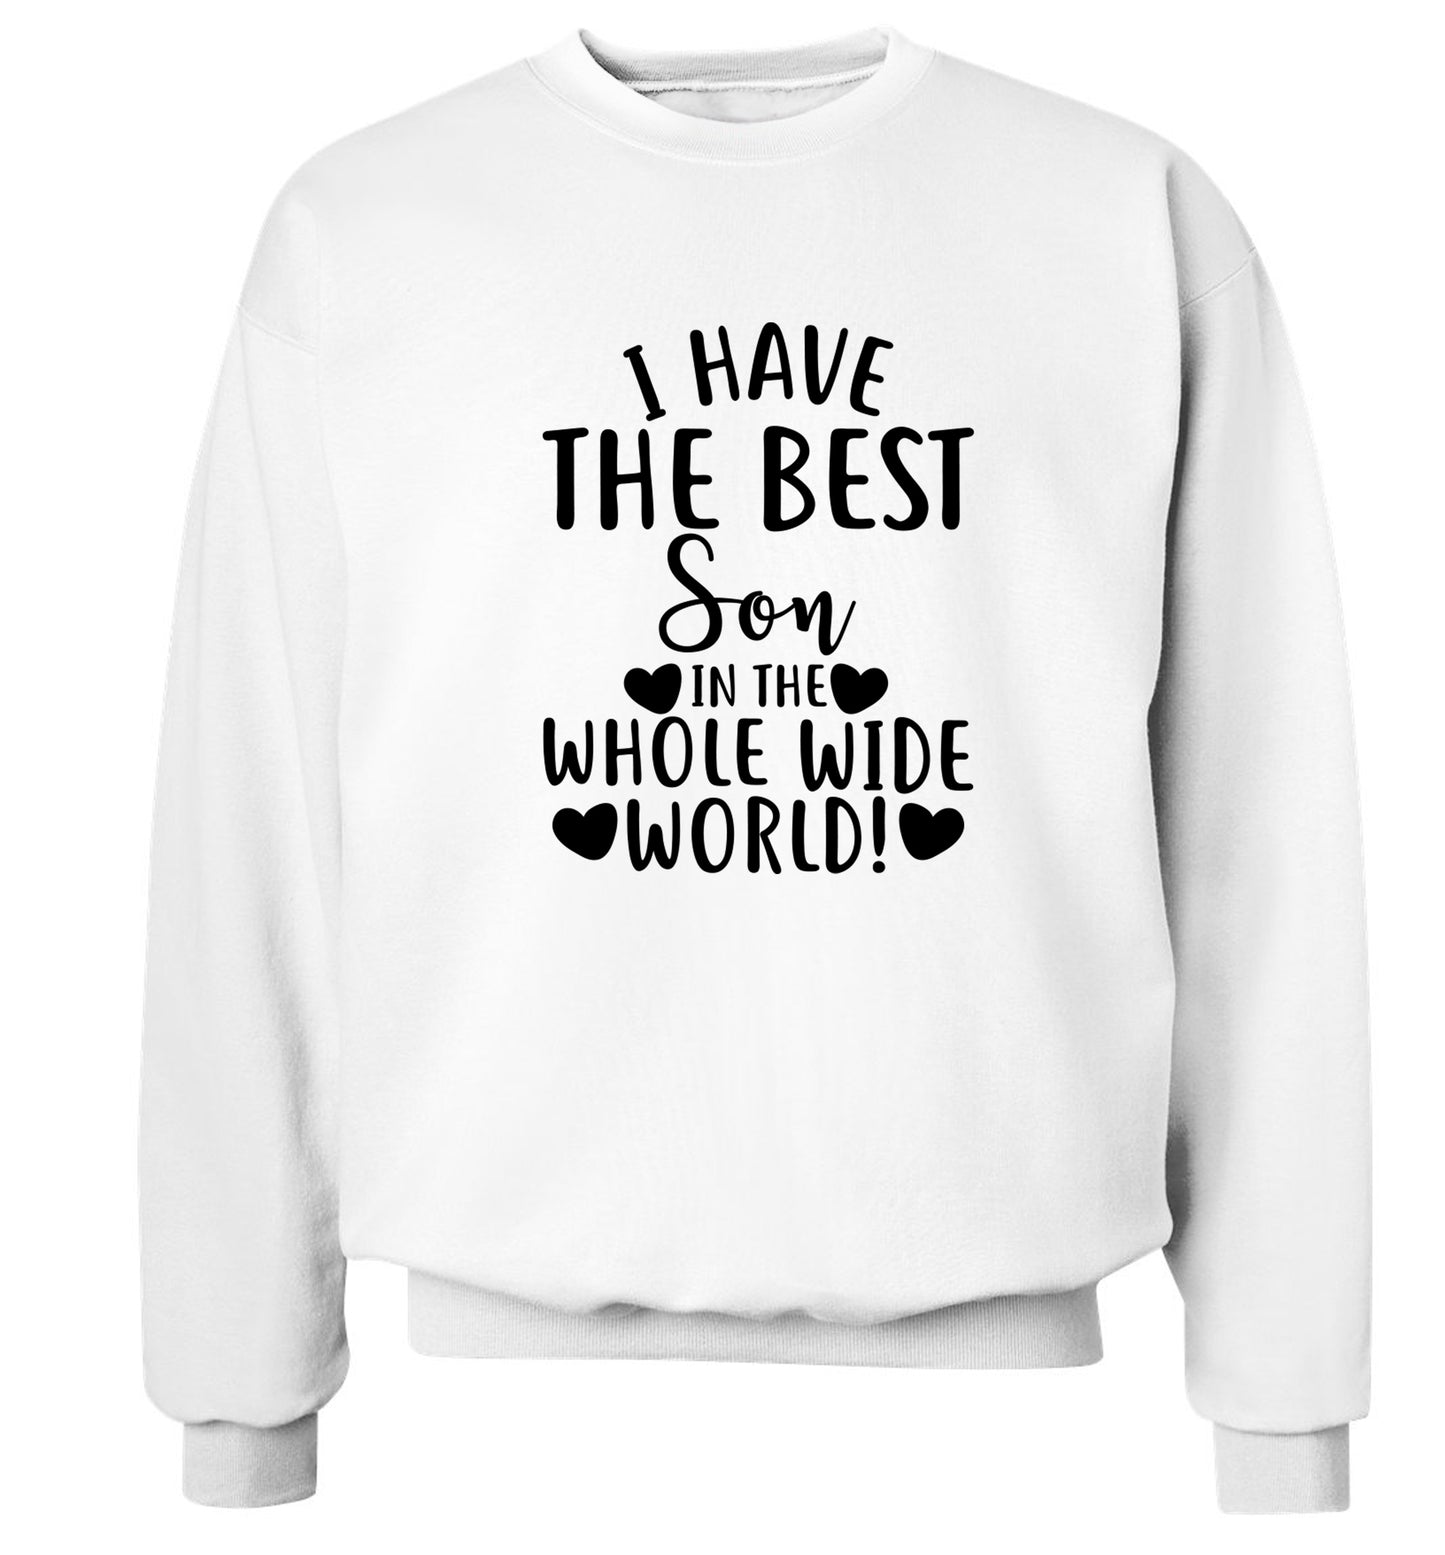 I have the best son in the whole wide world! Adult's unisex white Sweater 2XL